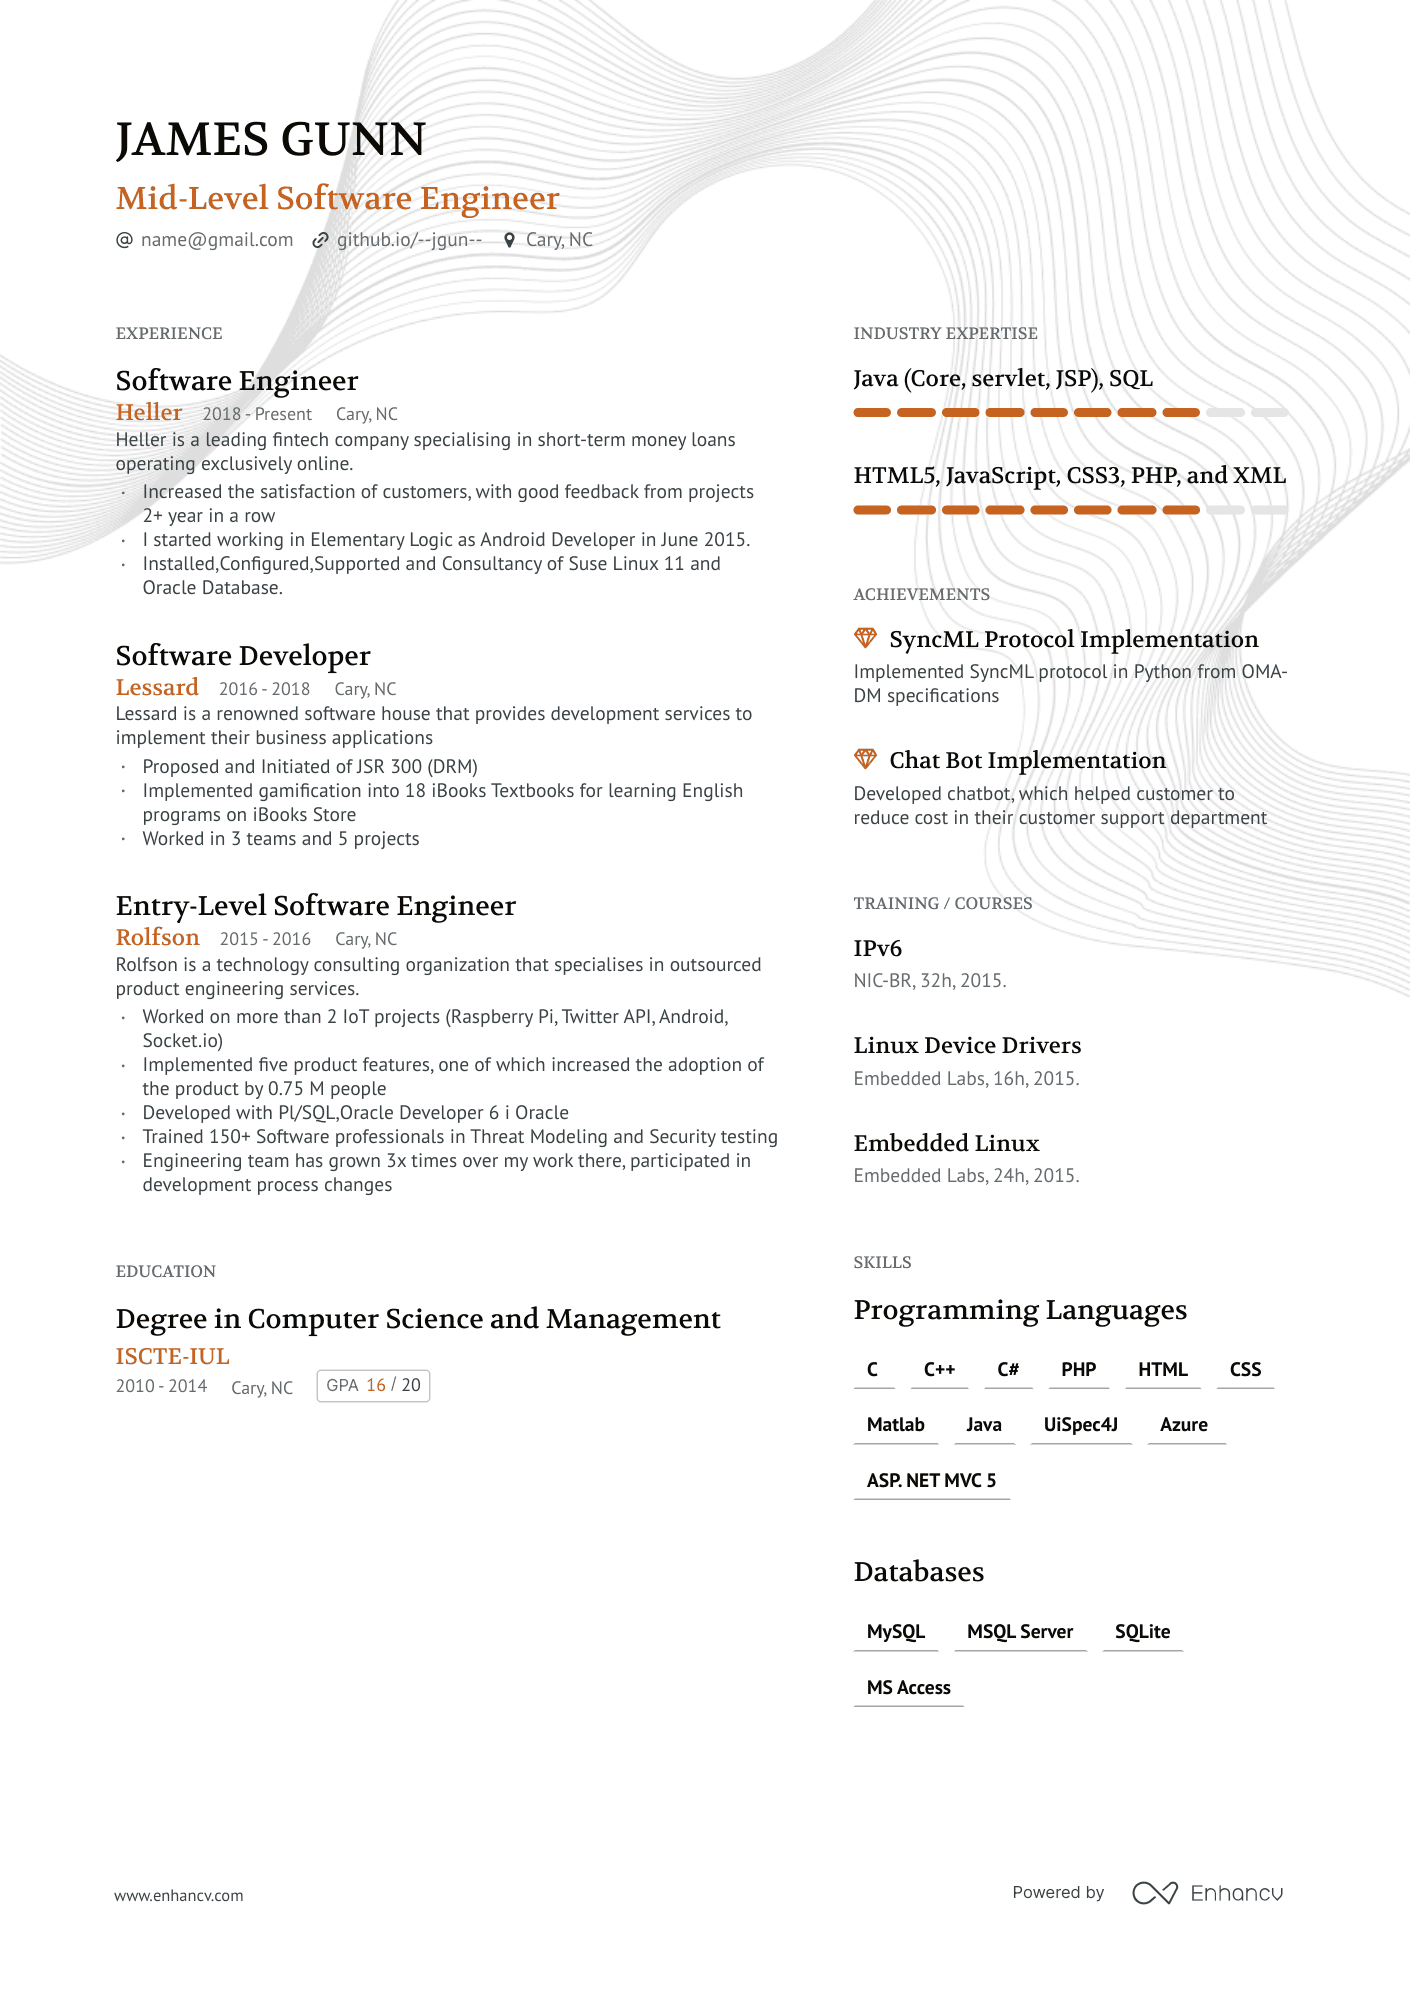 Mid Level Software Engineer resume example